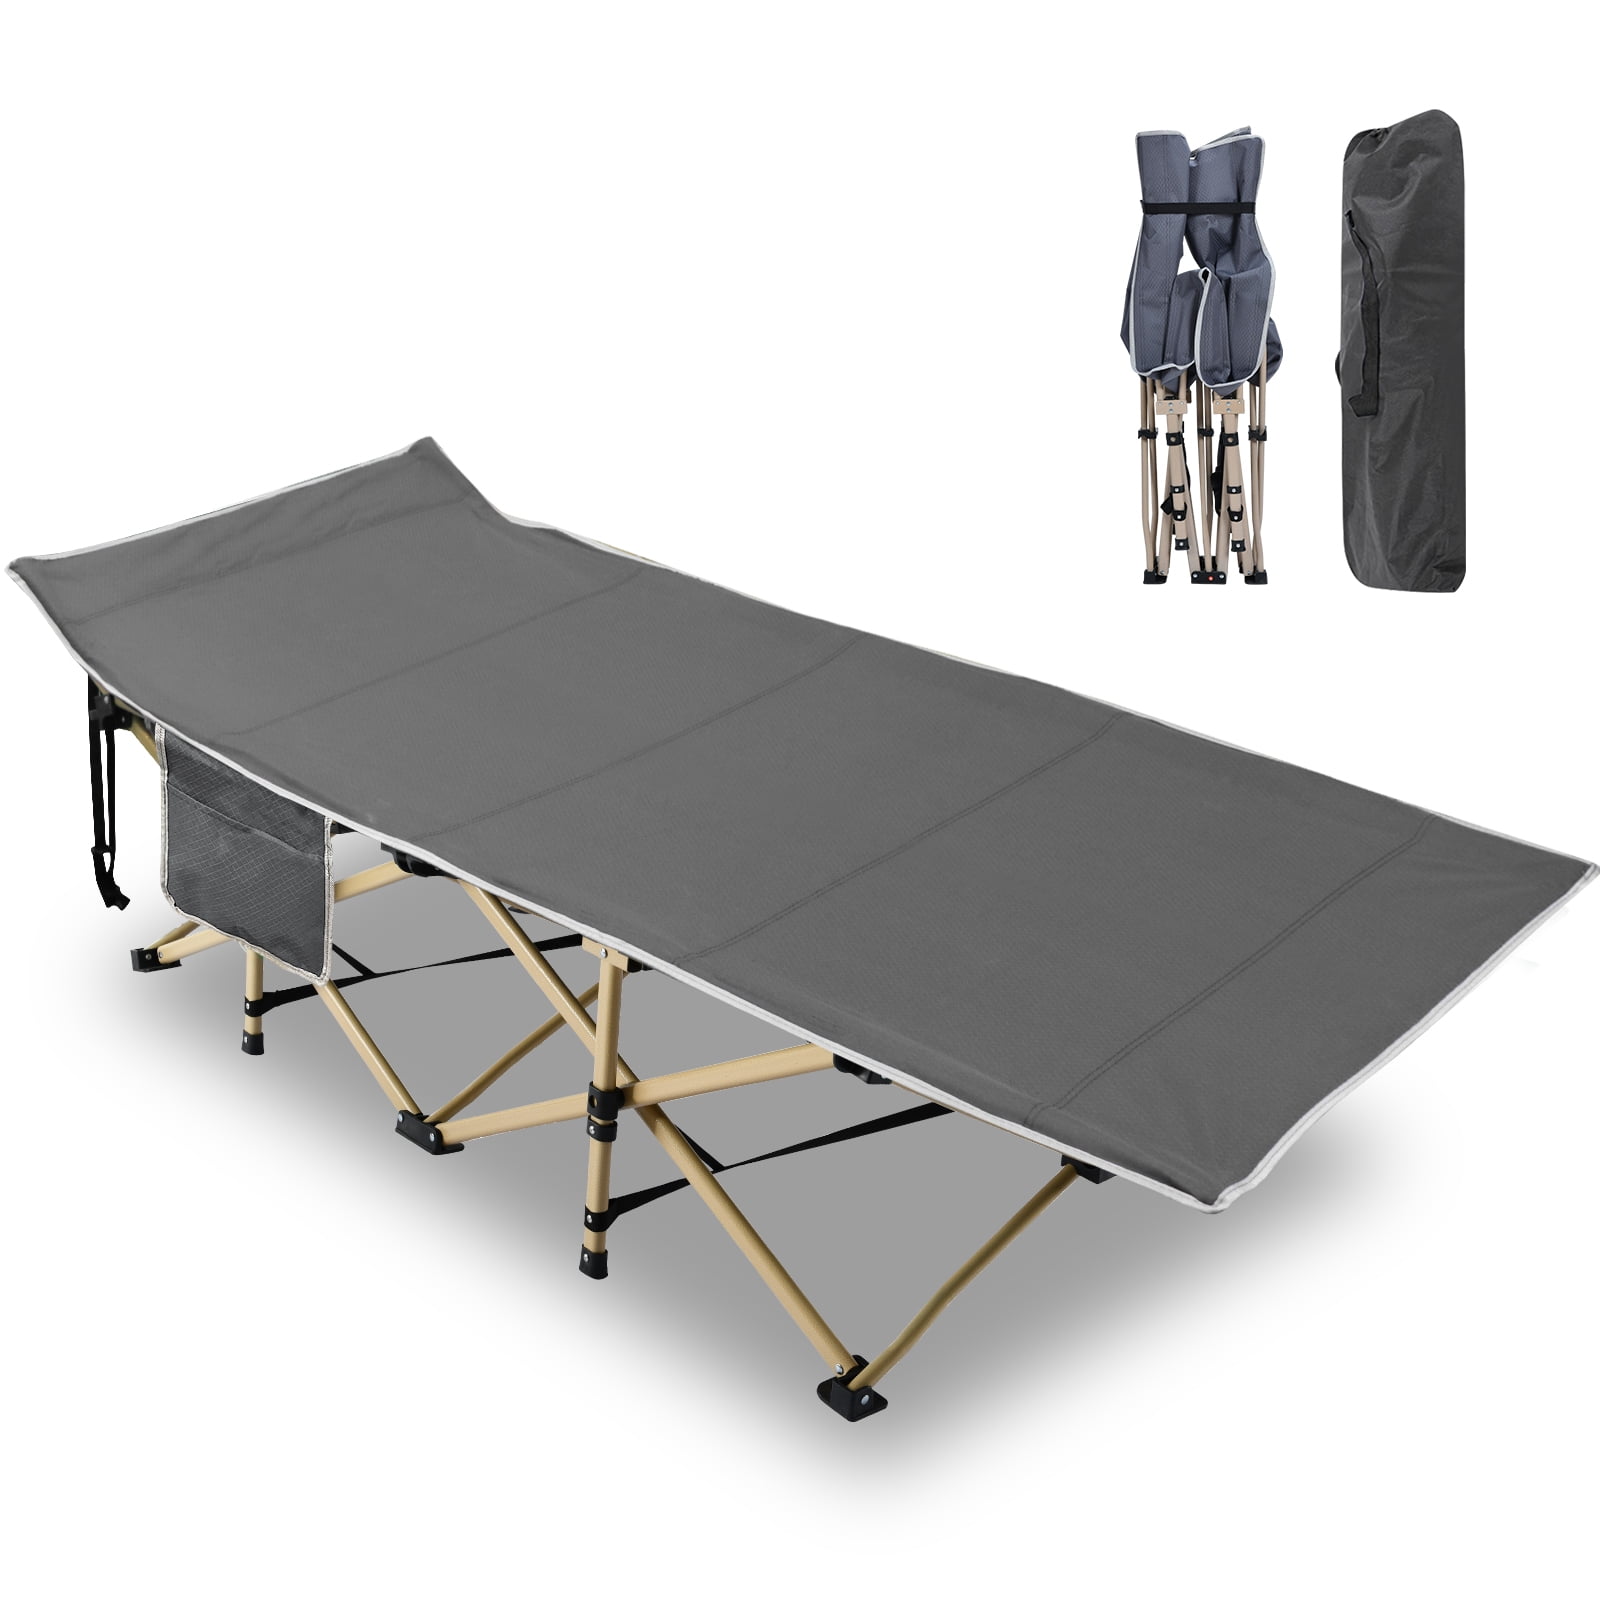 Portable Folding Bed Stable Camping Cot Outdoor Travel Sleeping w/ Side Pocket 